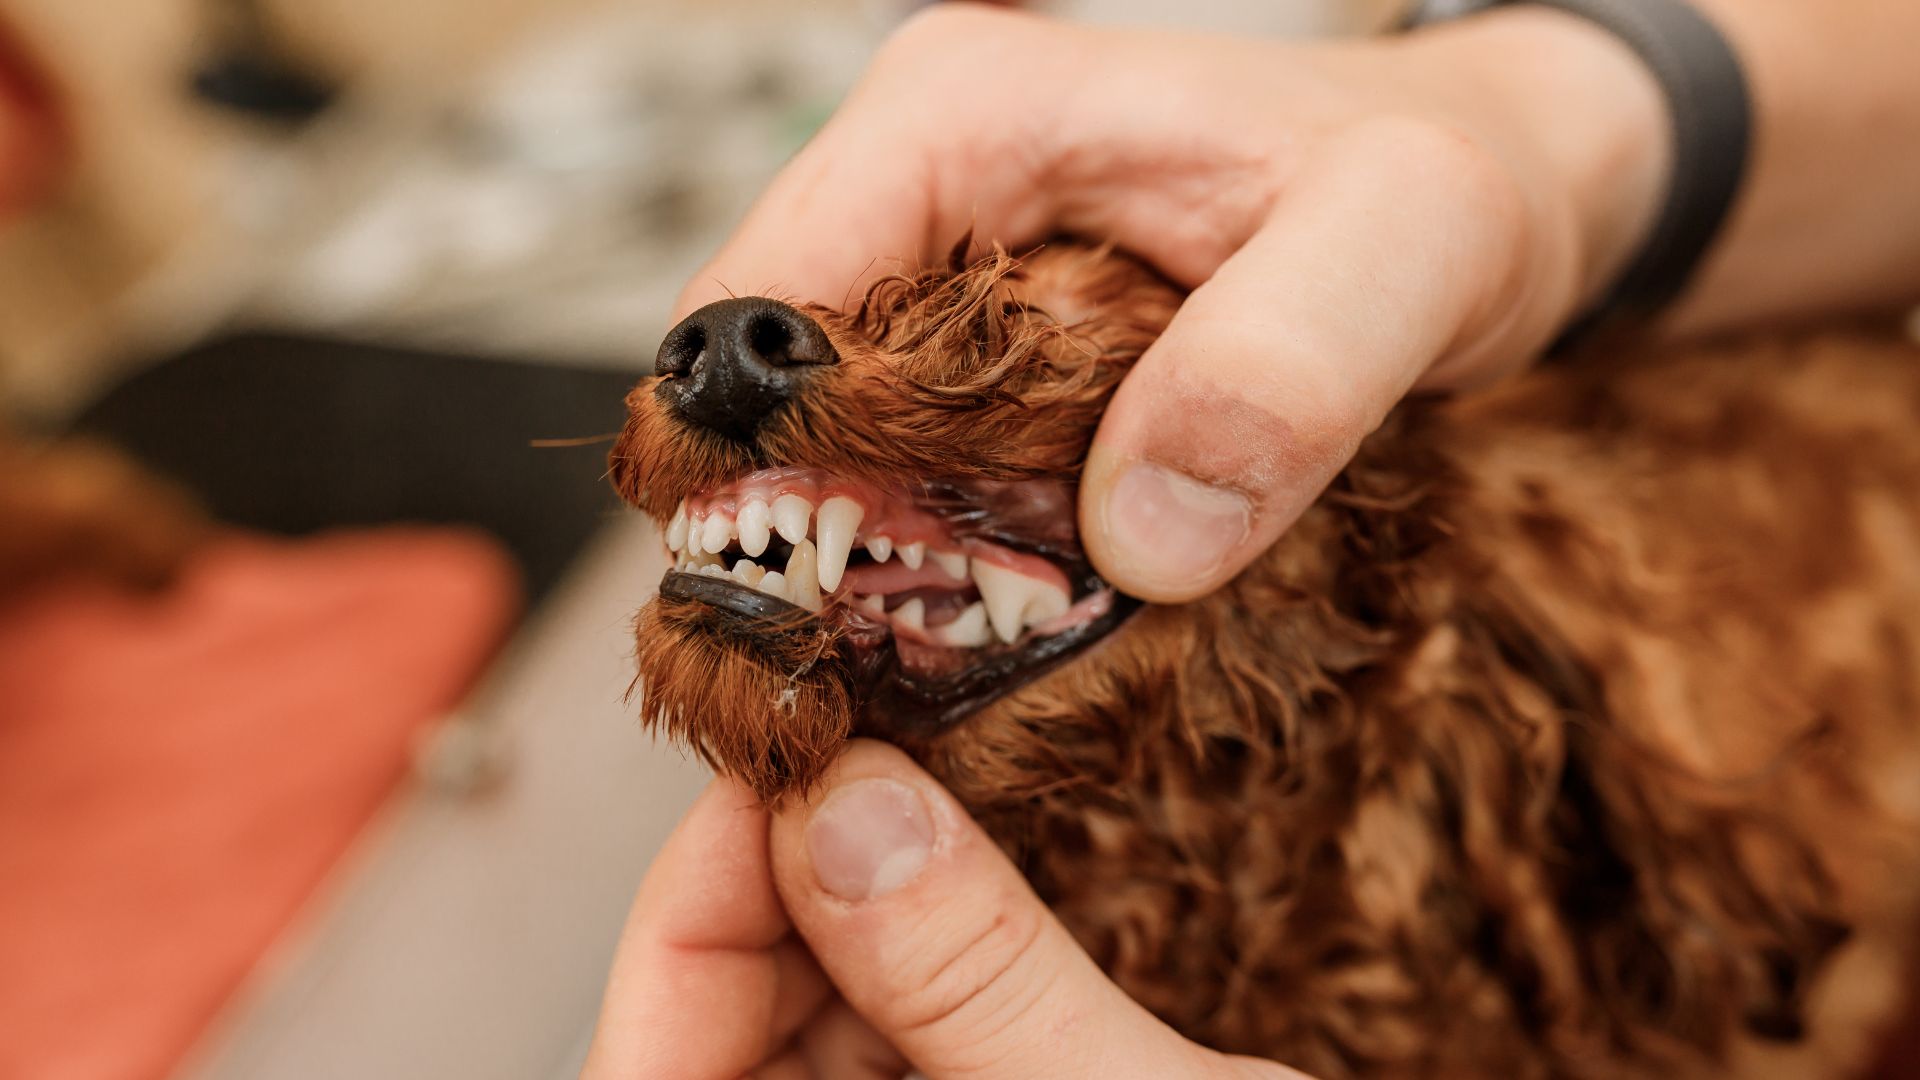 Professional man veterinarian dentist doing procedure of professional teeth cleaning dog in a veterinary clinic pet